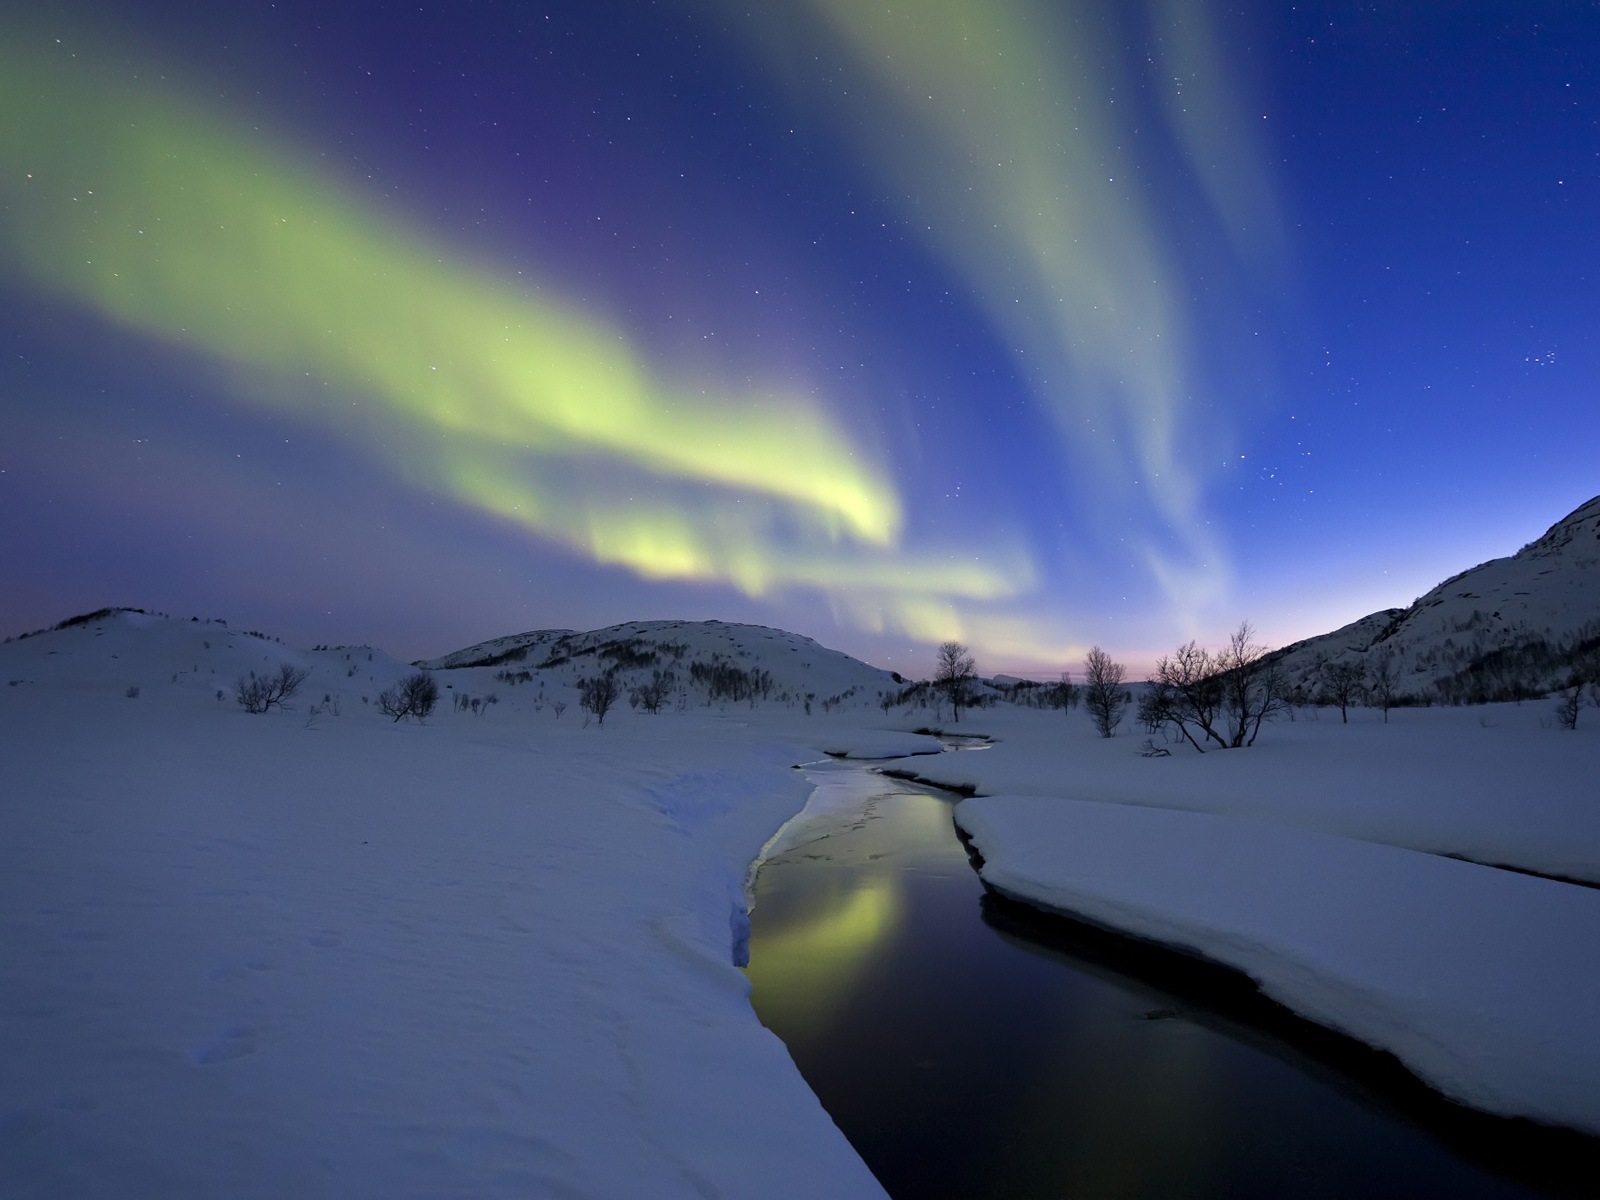 Natural wonders of the Northern Lights HD Wallpaper (2) #19 - 1600x1200